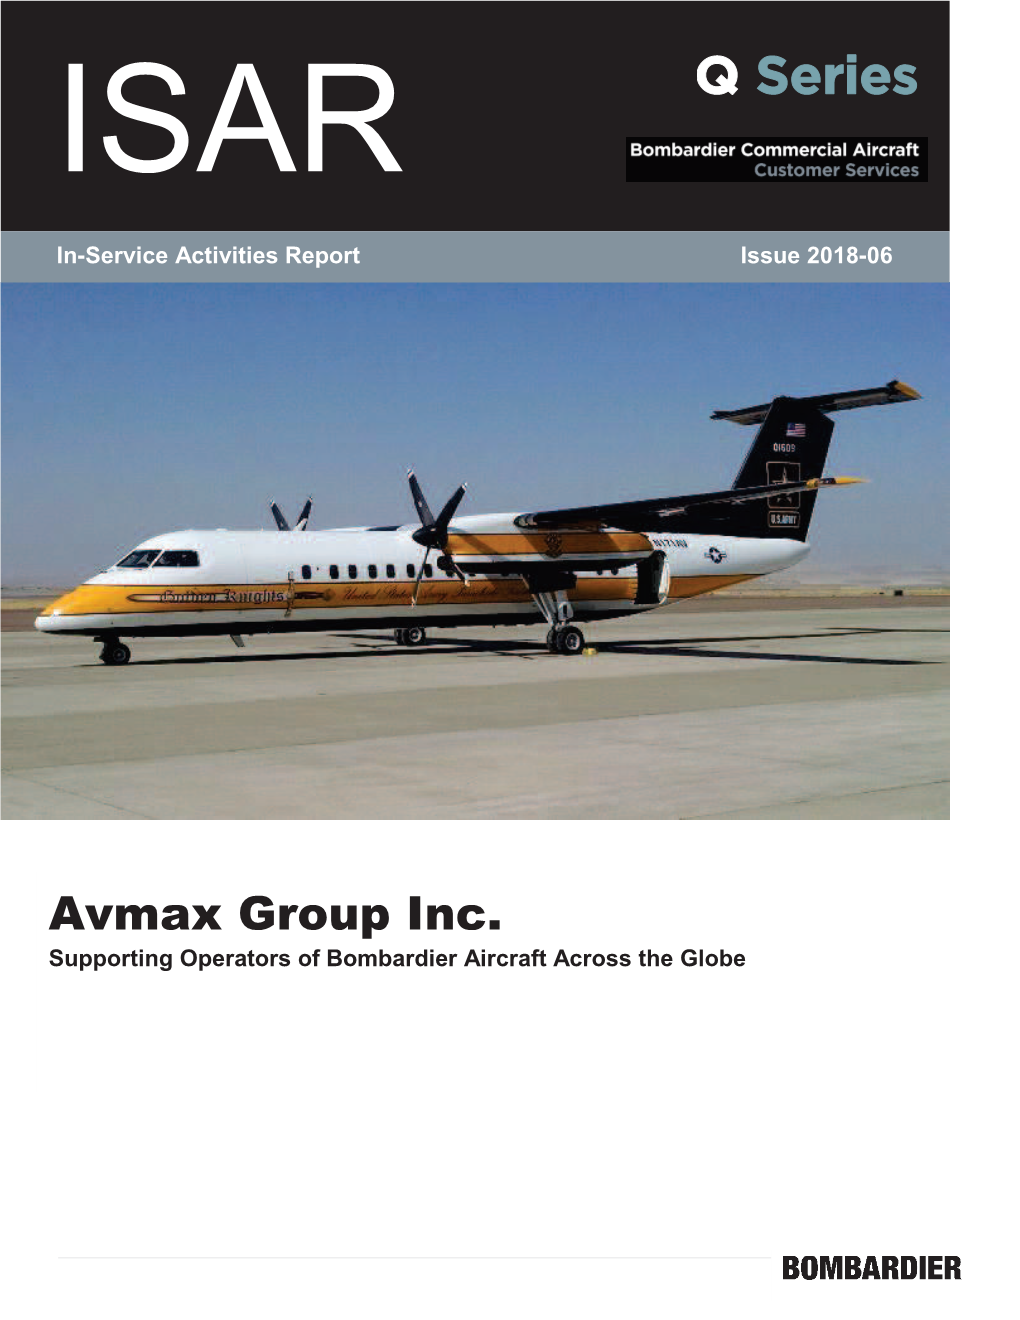 Avmax Group Inc. (Avmax) Is an Aviation and Aerospace Company That Defies Easy Description, but Consistently Provides Excellence in Service to All Its Customers